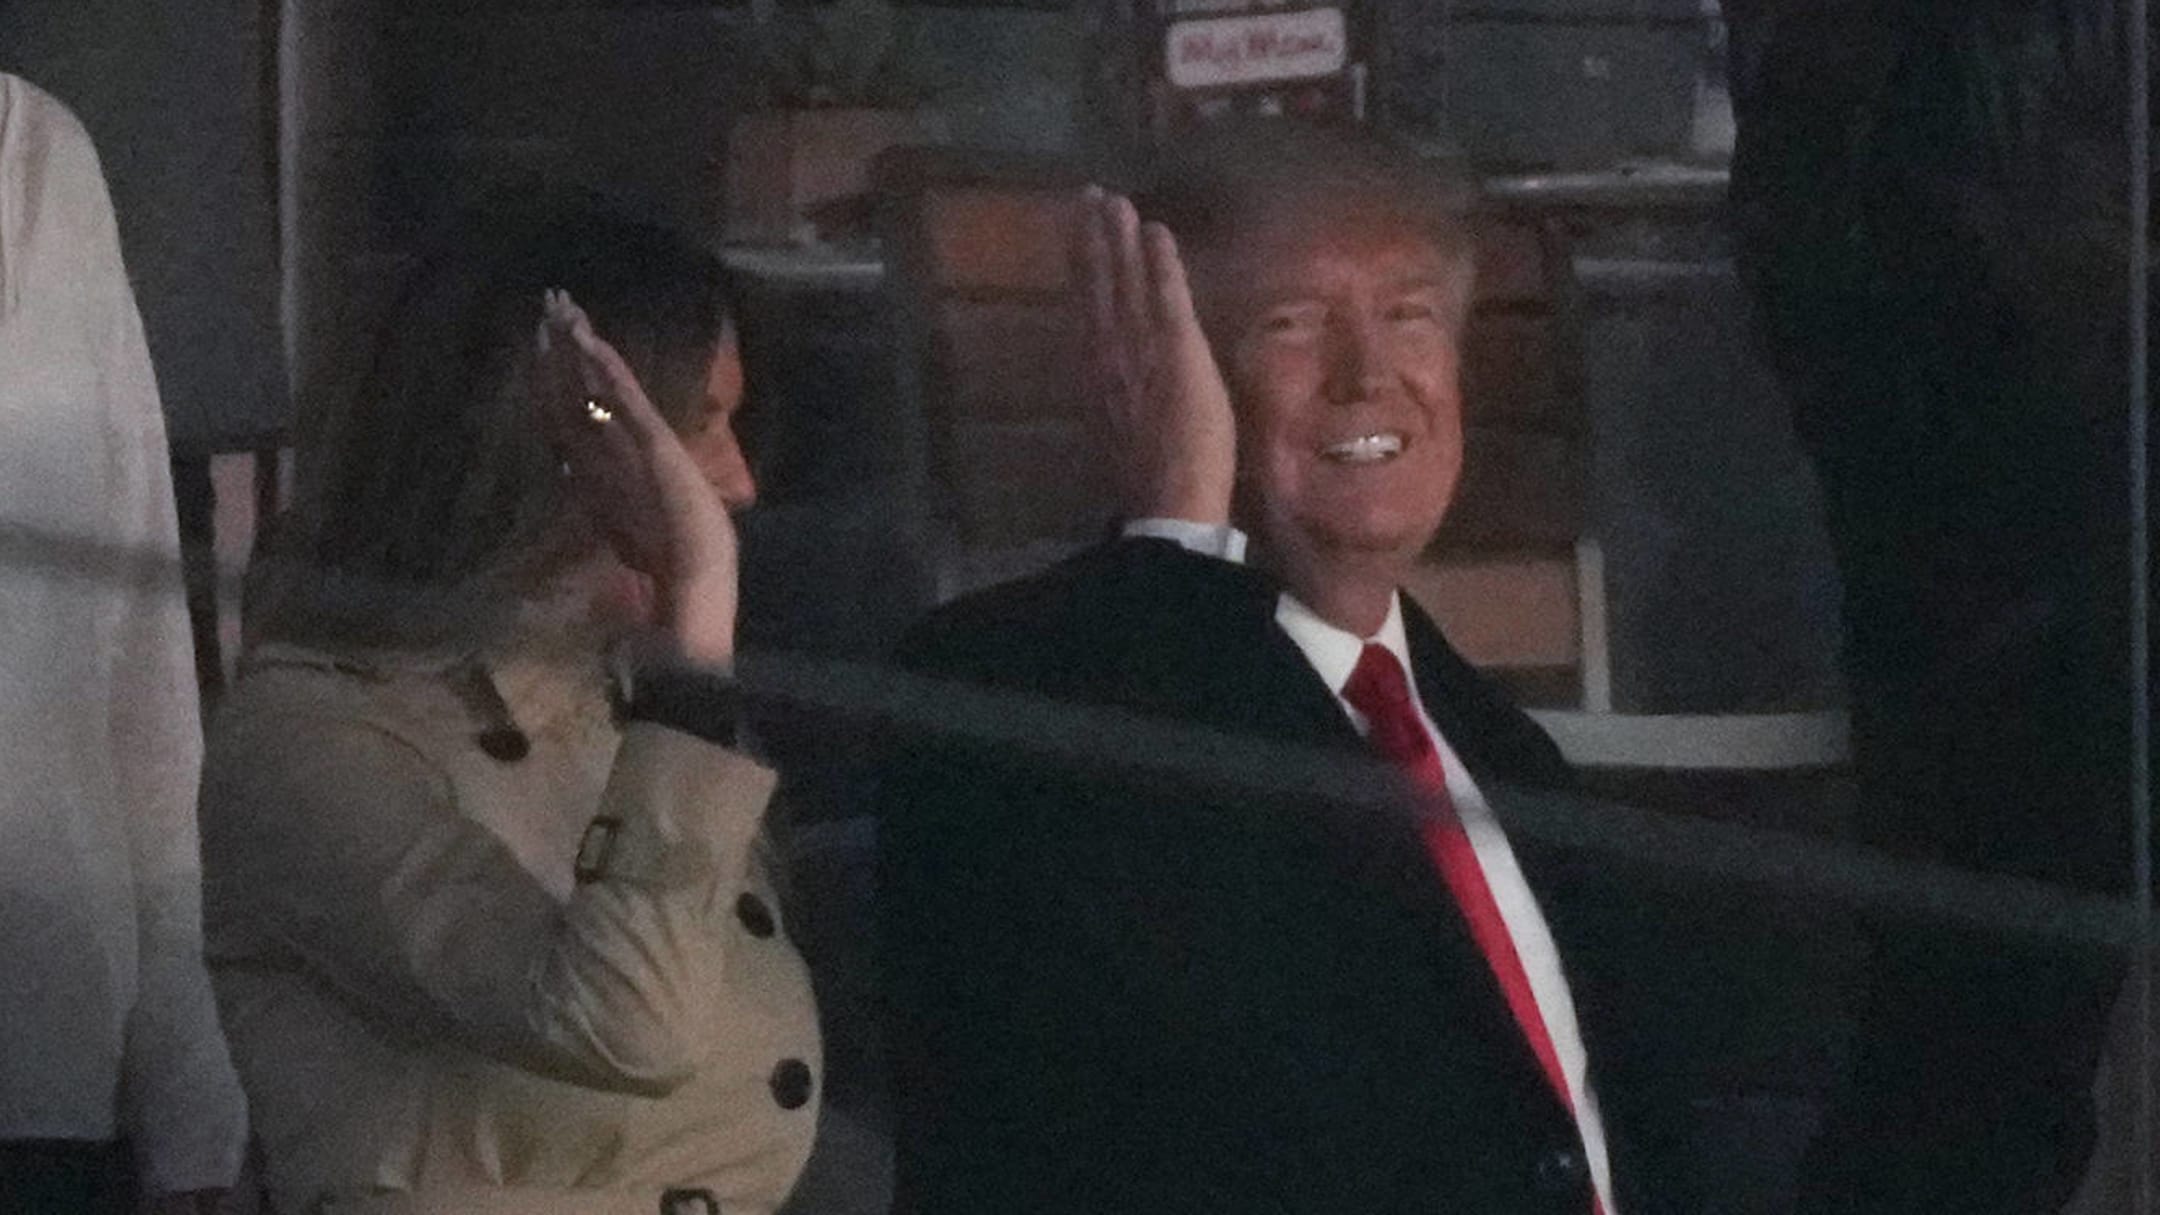 Donald Trump does tomahawk chop with Braves fans at World Series